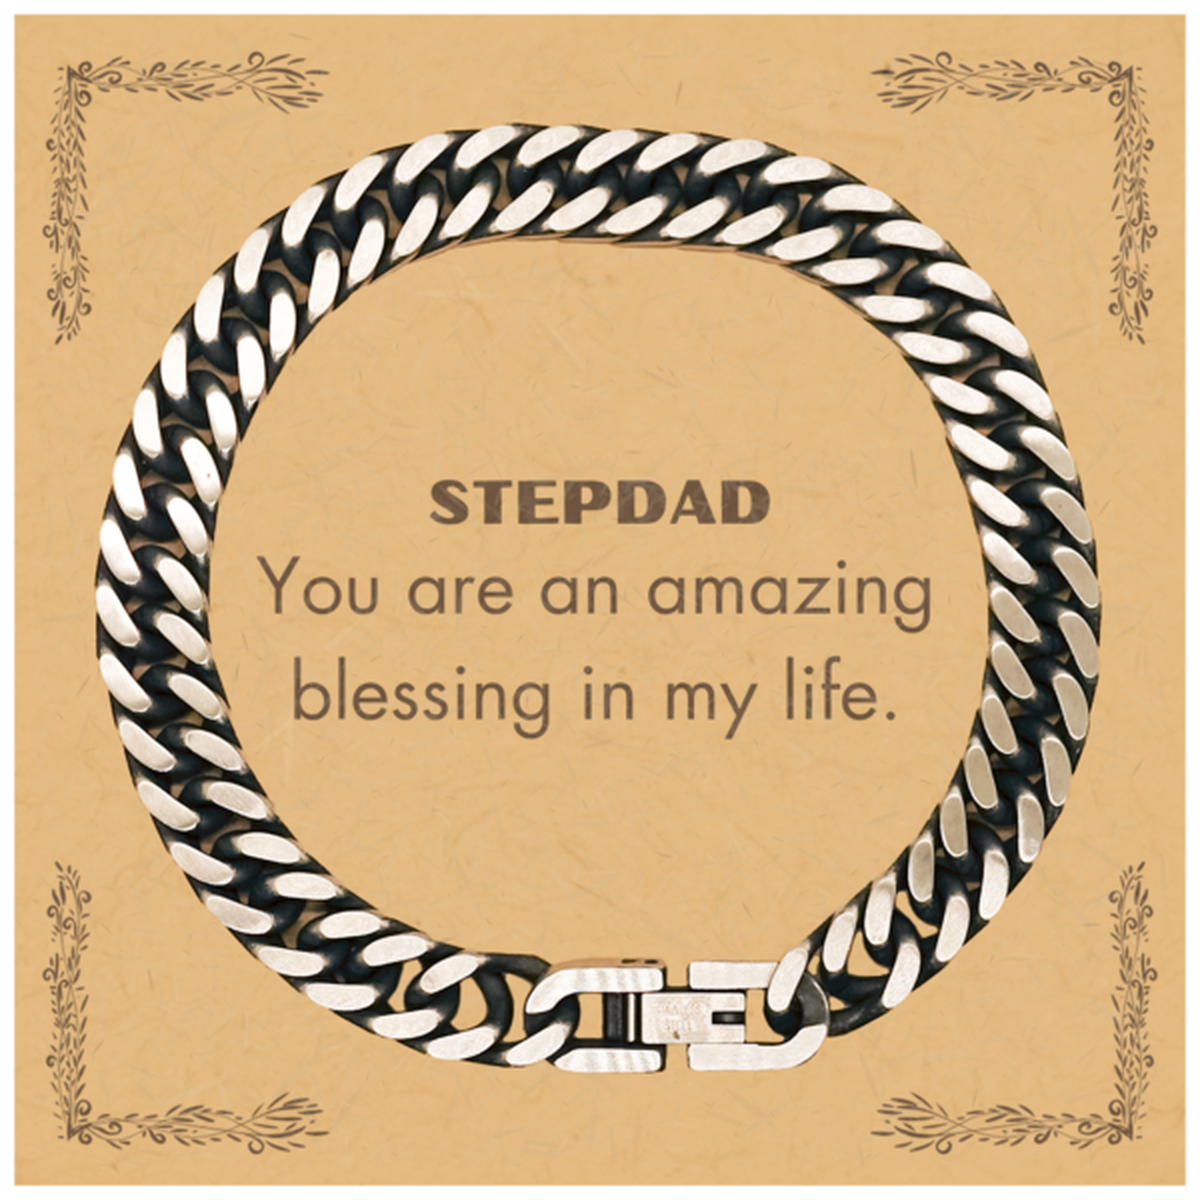 Stepdad Cuban Link Chain Bracelet, You are an amazing blessing in my life, Thank You Gifts For Stepdad, Inspirational Birthday Christmas Unique Gifts For Stepdad